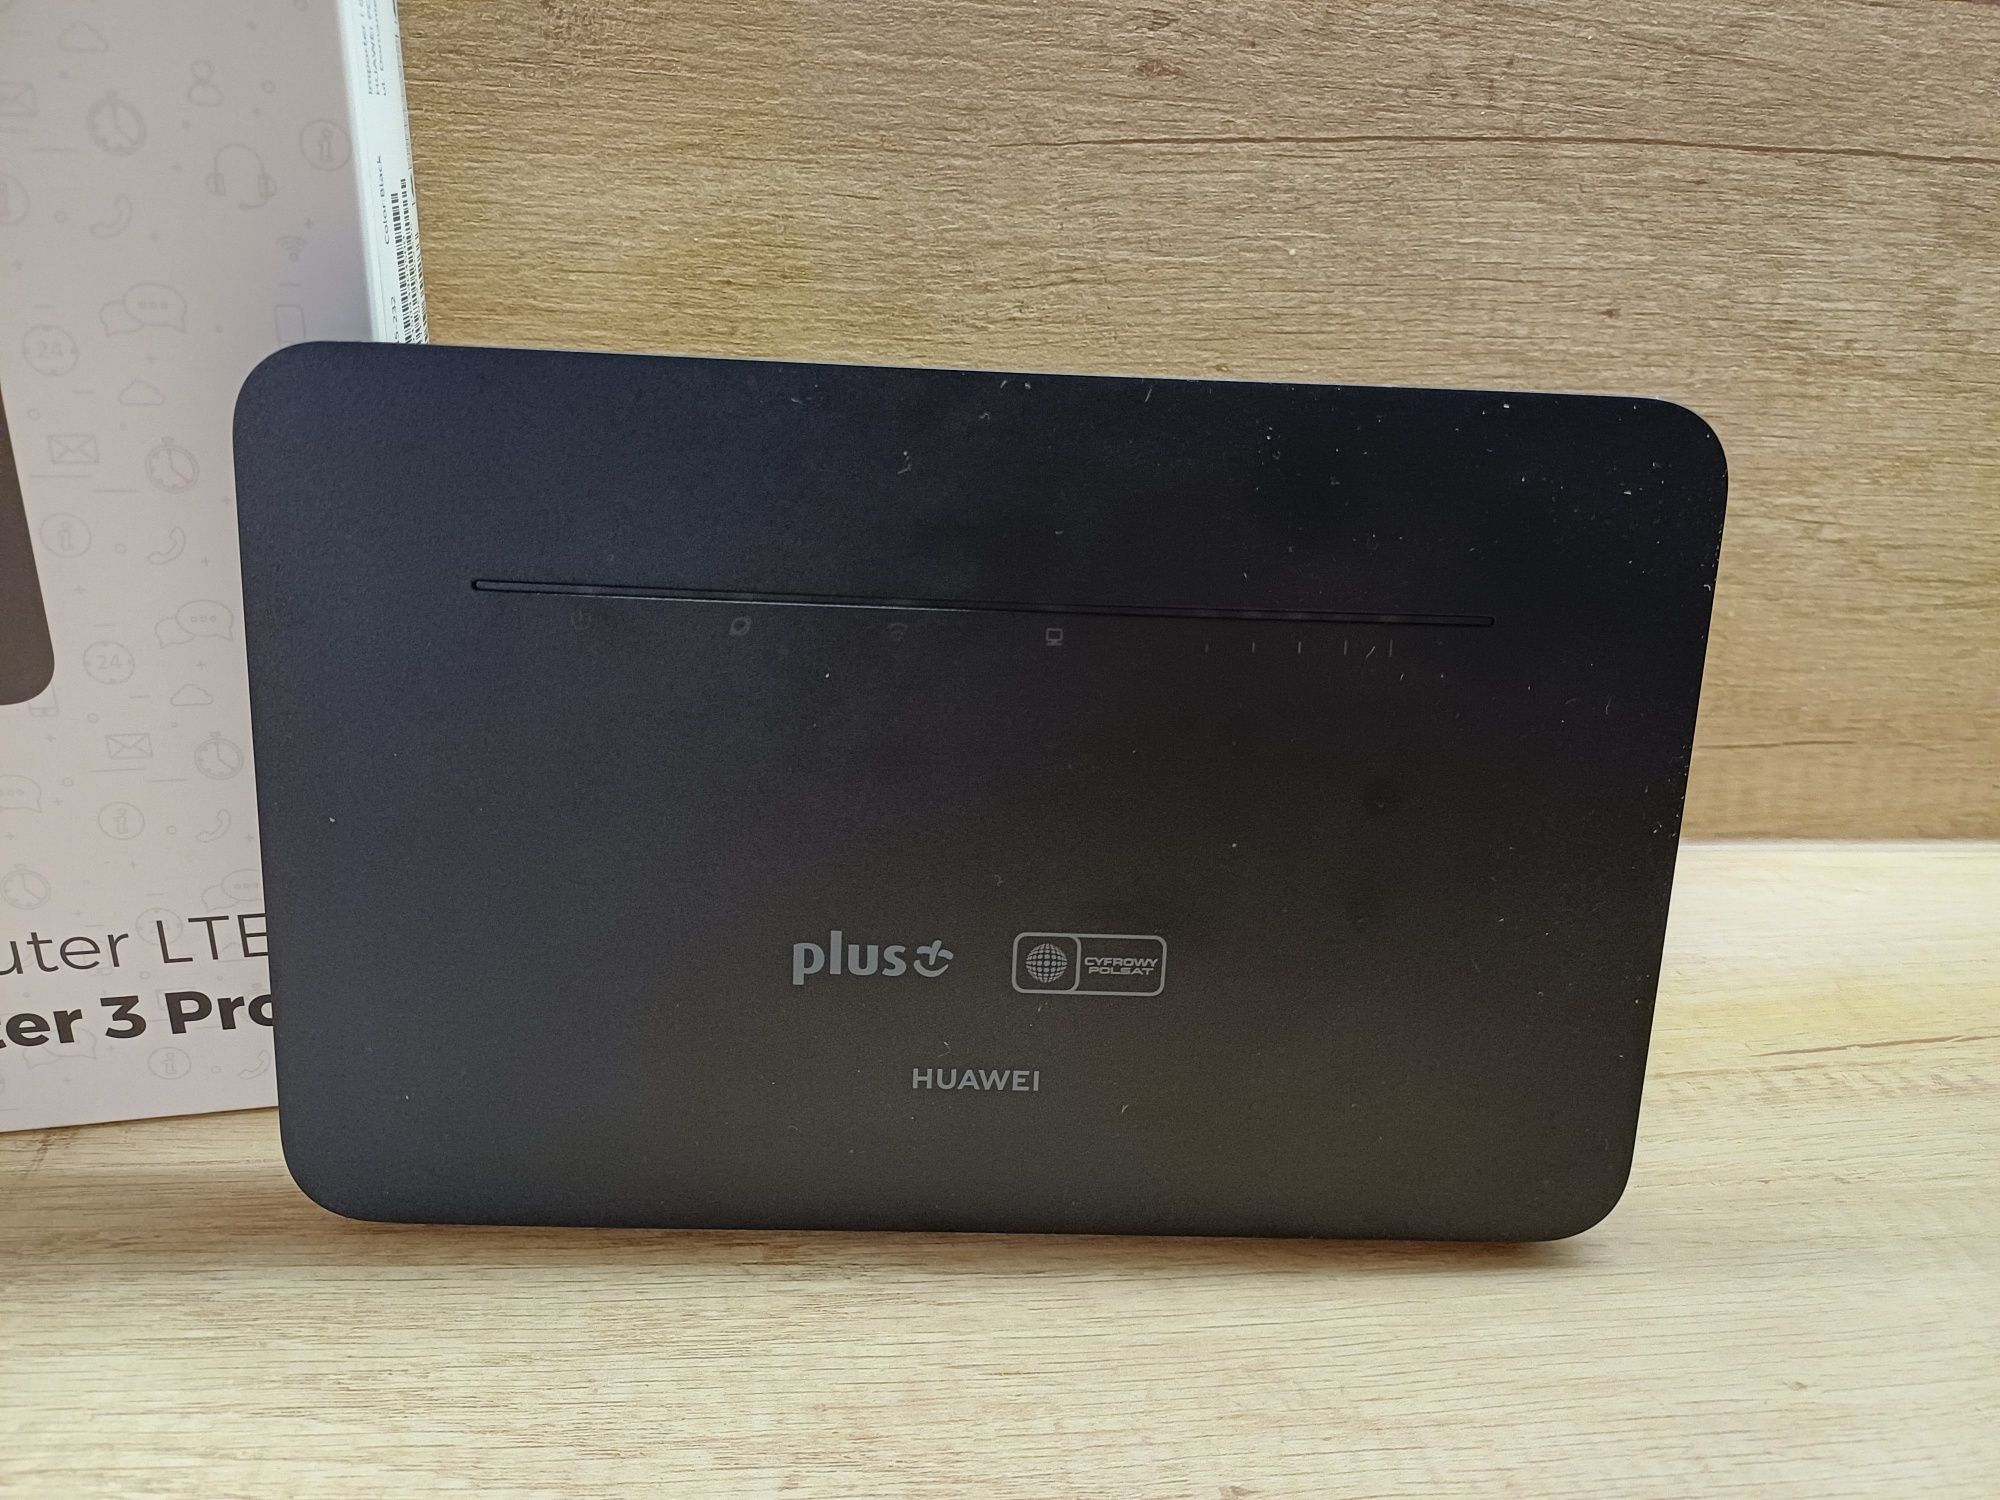 Router Huawei 4G 3Pro